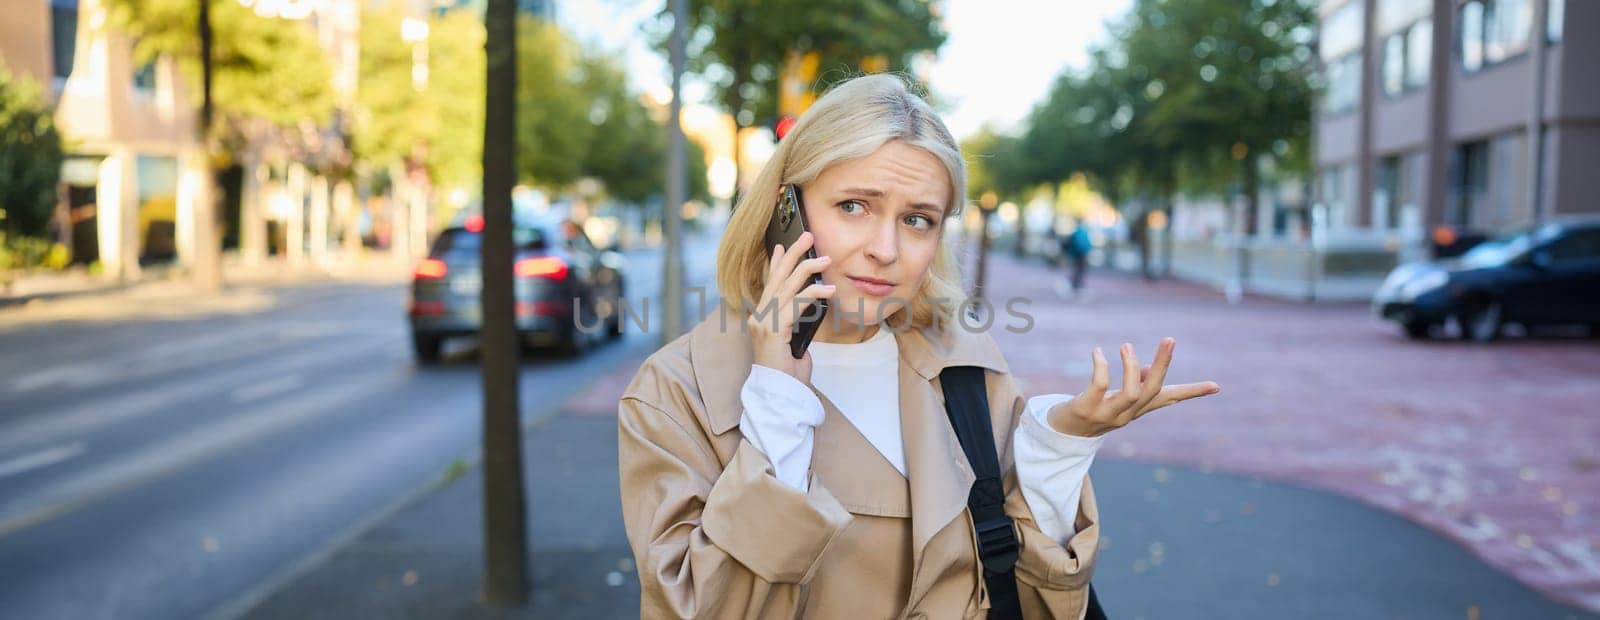 Portrait of woman with confused face, talking on mobile phone, answer phone call, standing on street with puzzled, clueless expression, posing on road.